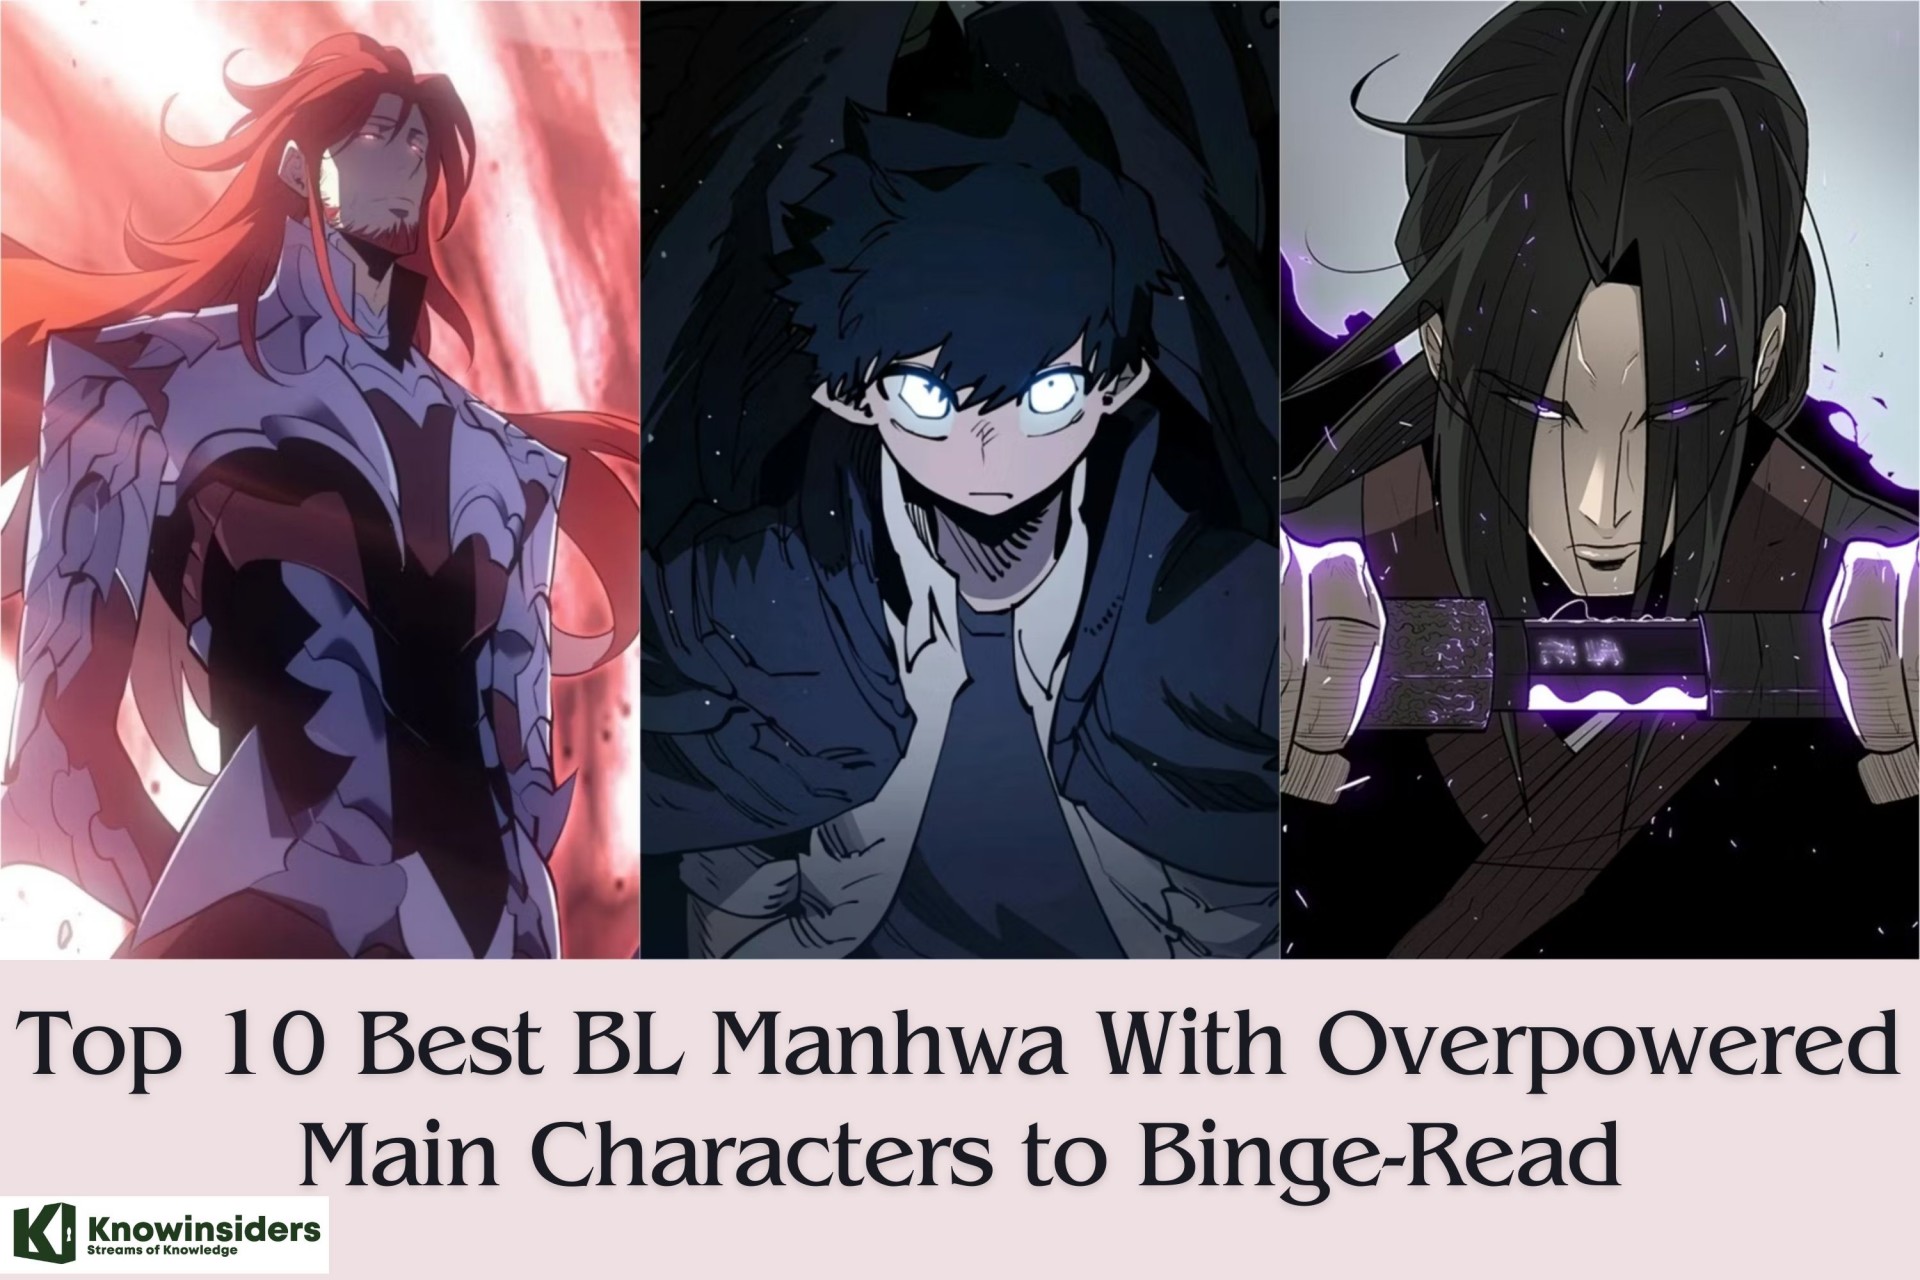 Top 10 Best BL Manhwa With Overpowered Main Characters to Binge-Read